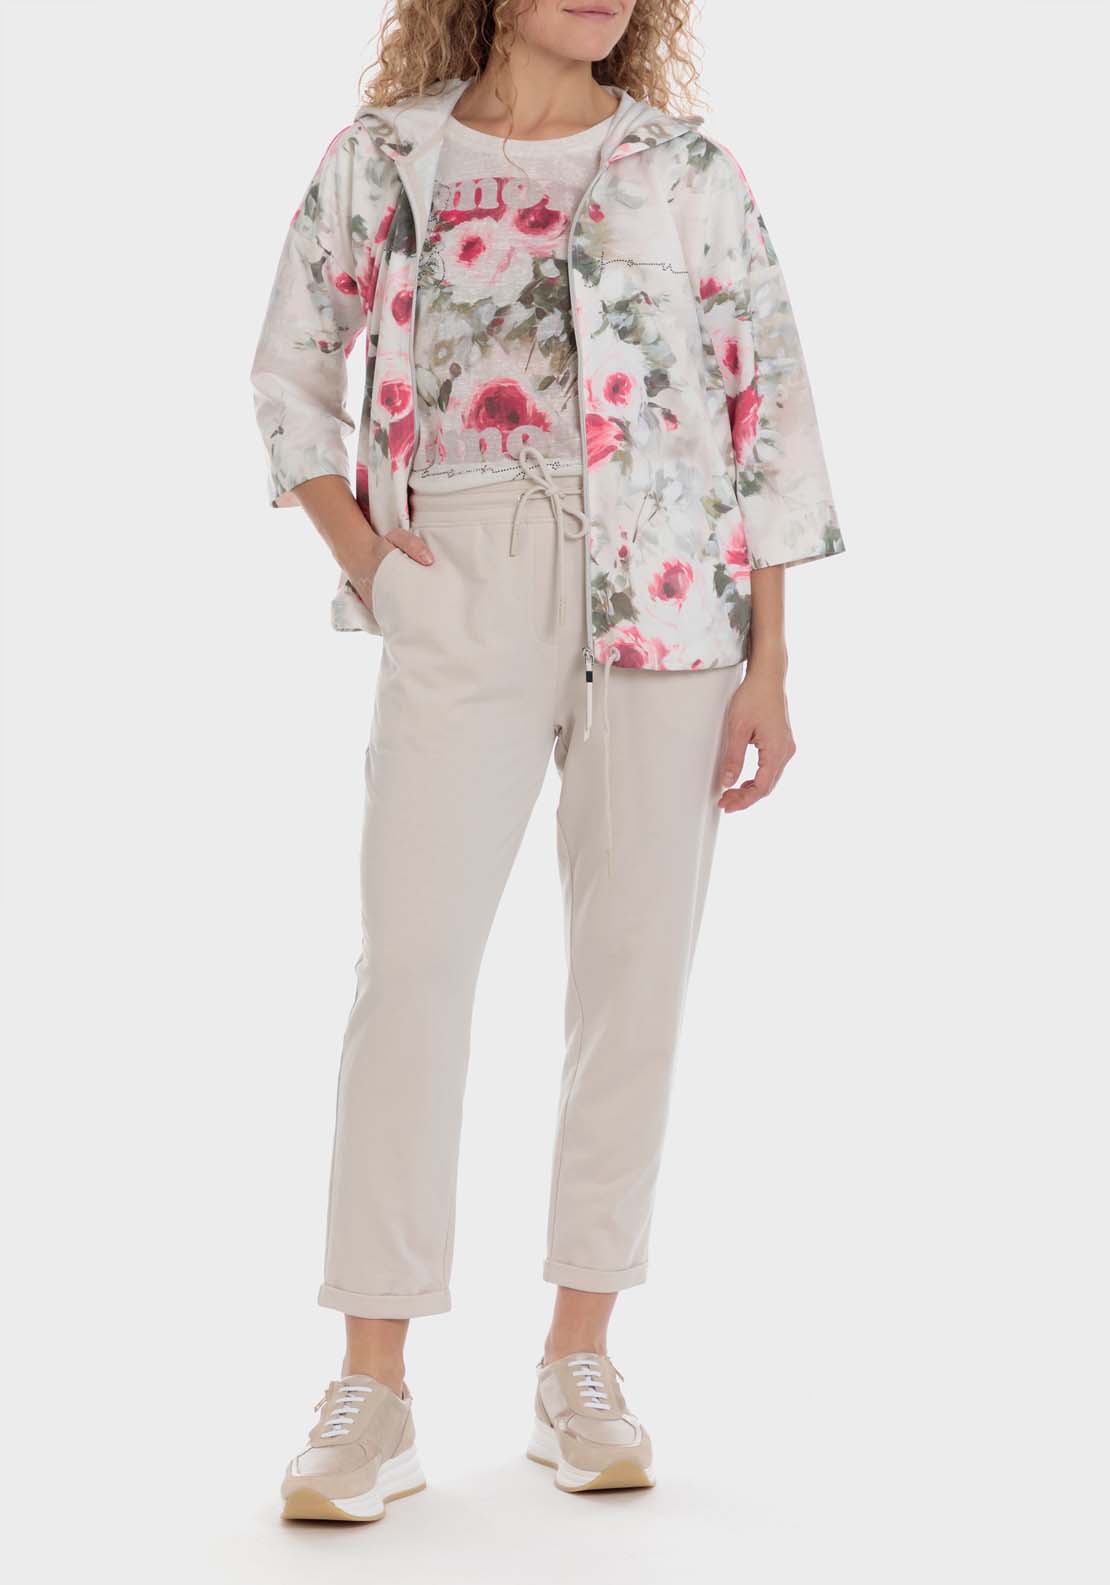 Punt Roma Floral Print Sports Jacket 3 Shaws Department Stores